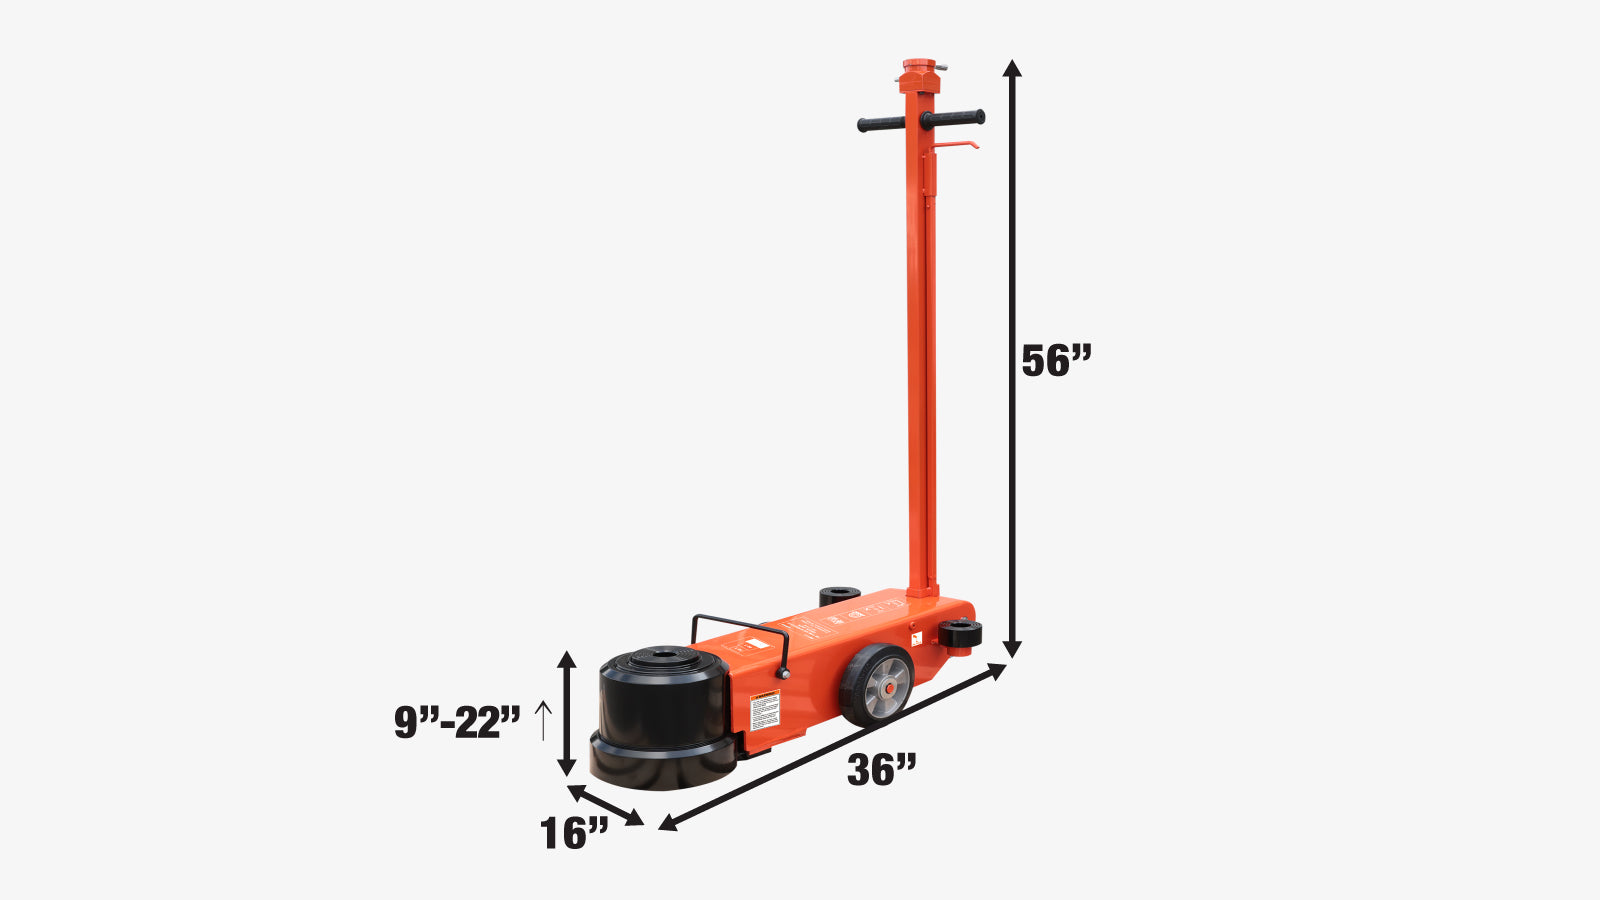 TMG Industrial 80 Ton Air Hydraulic Two Stage Truck Jack, 50 Ton Self-Retracting Ram, Adjustable 90°-180°, TMG-AJT80-specifications-image